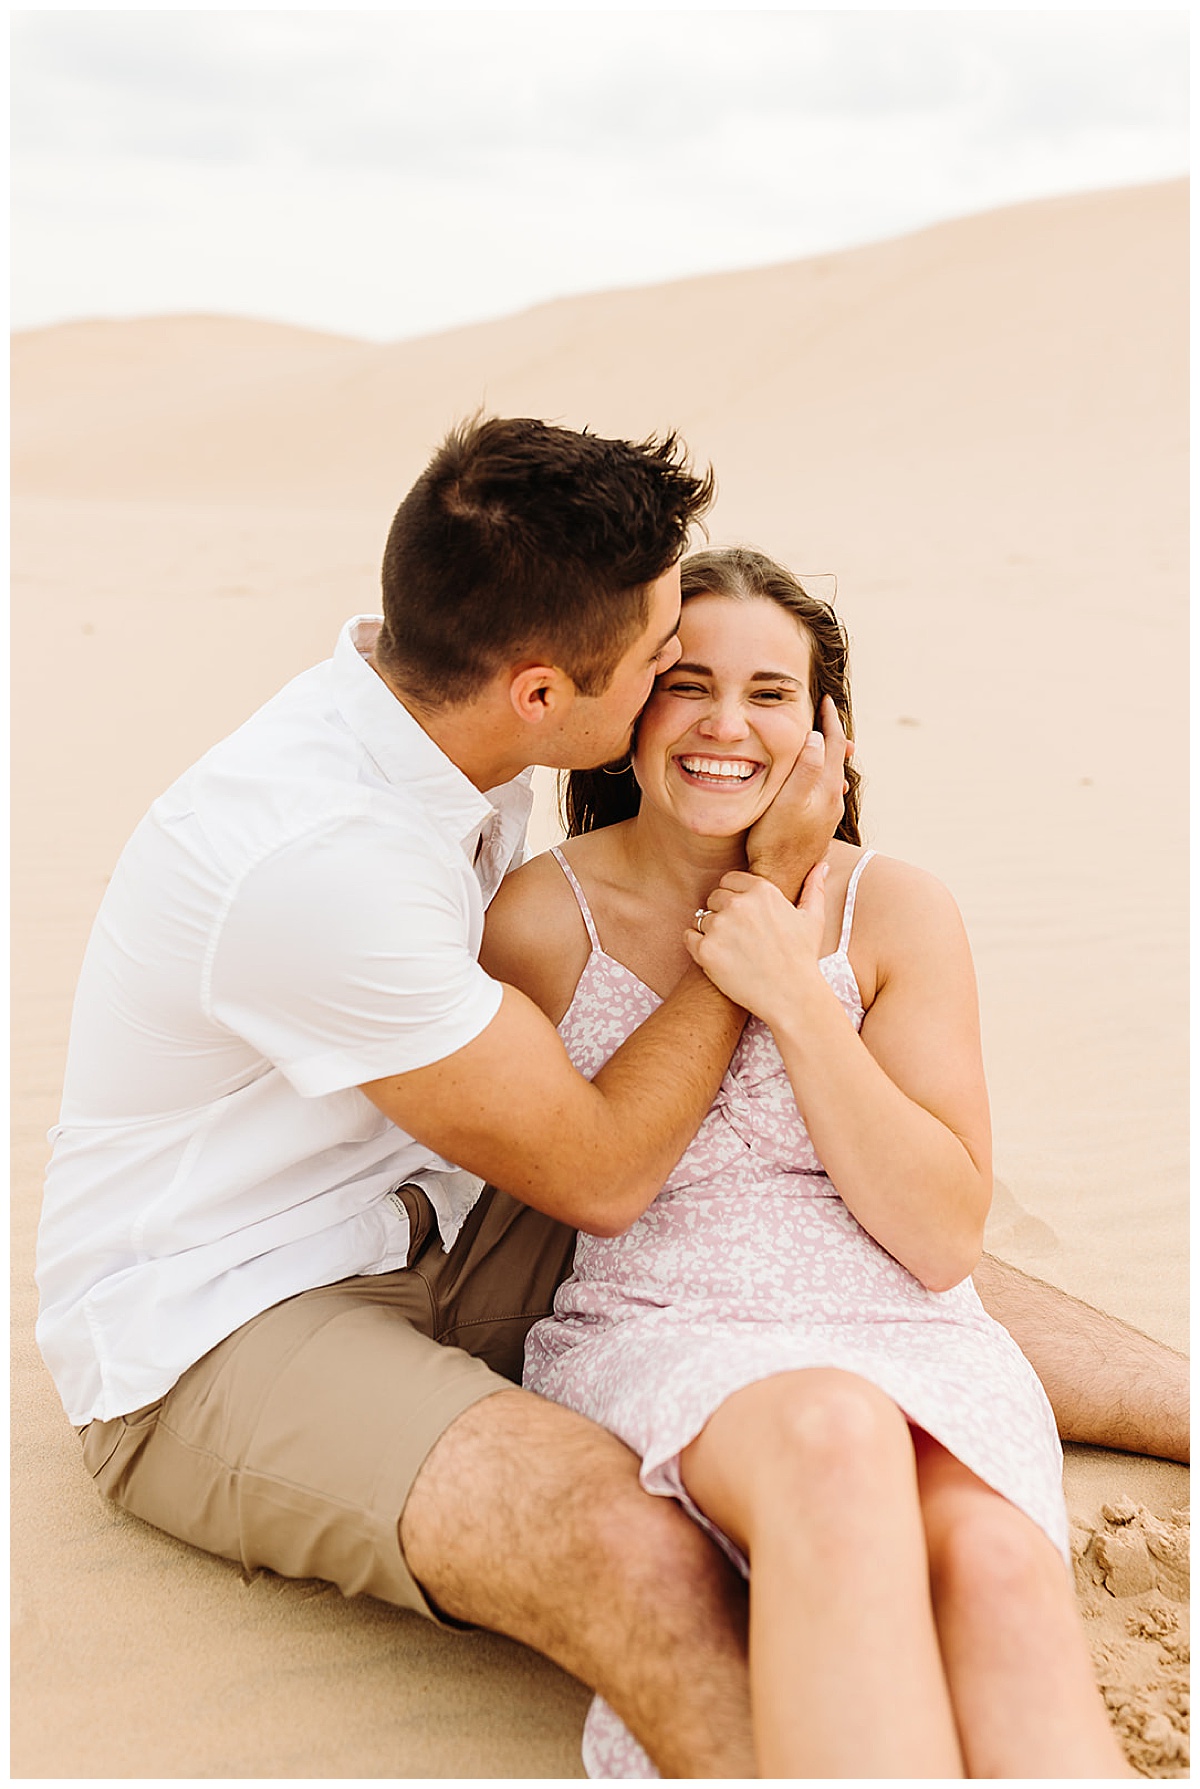 Guy kisses girl on cheek during Mears, MI Engagement session